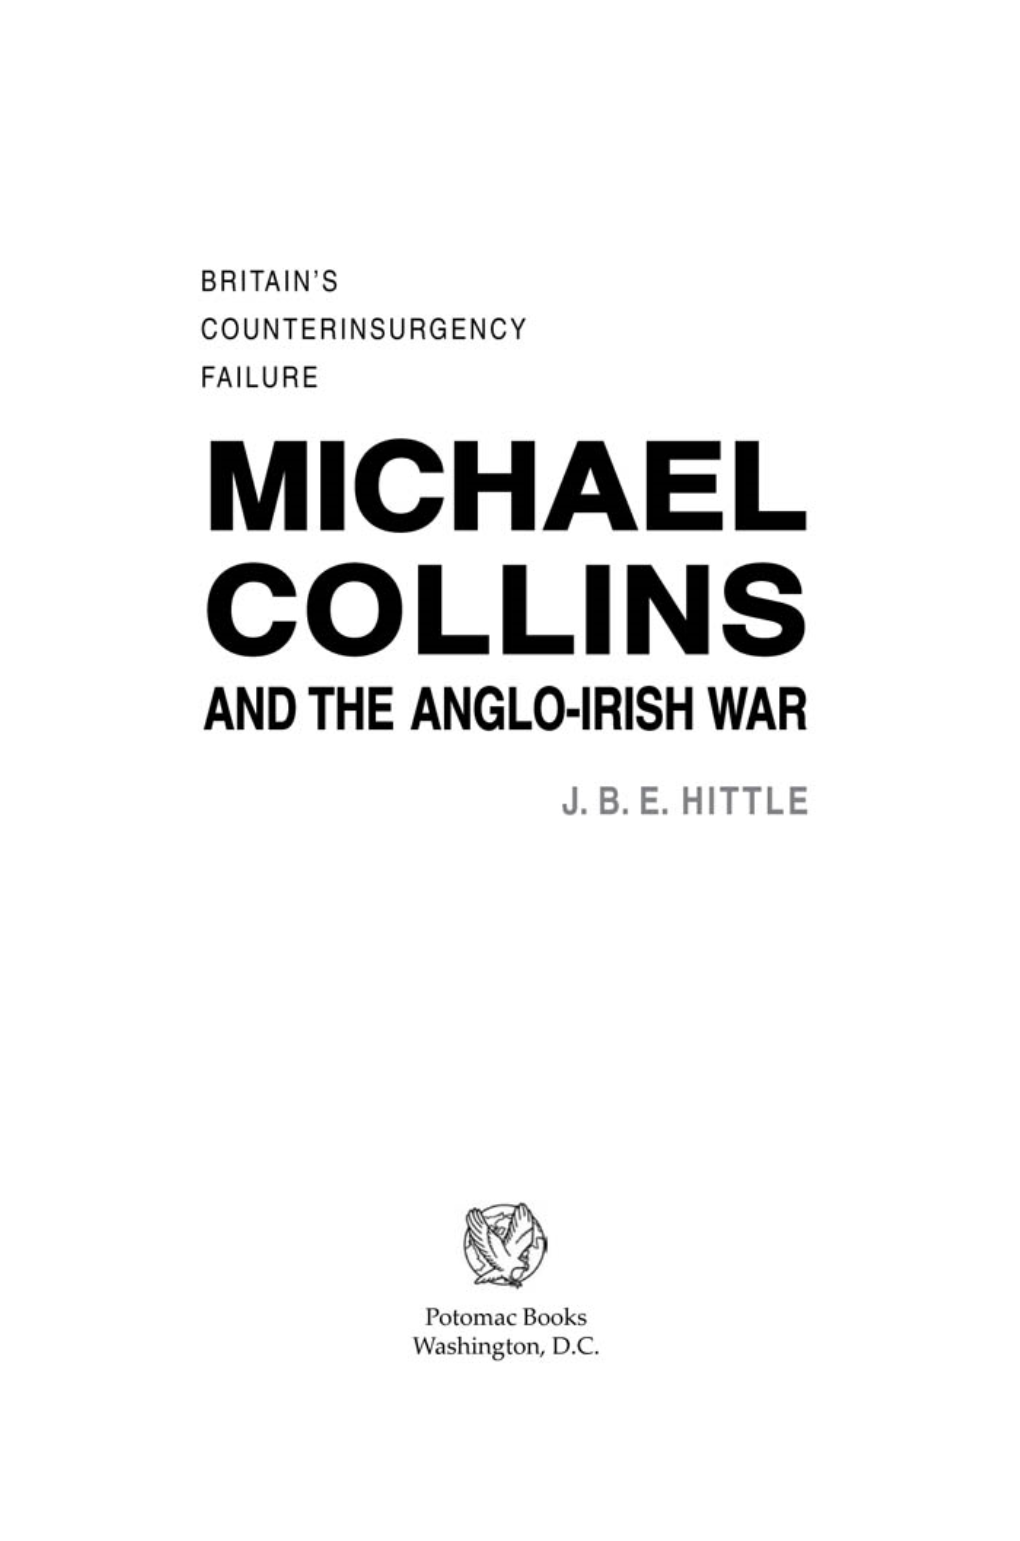 Michael Collins and the Anglo-Irish War: Britain's Counterinsurgency